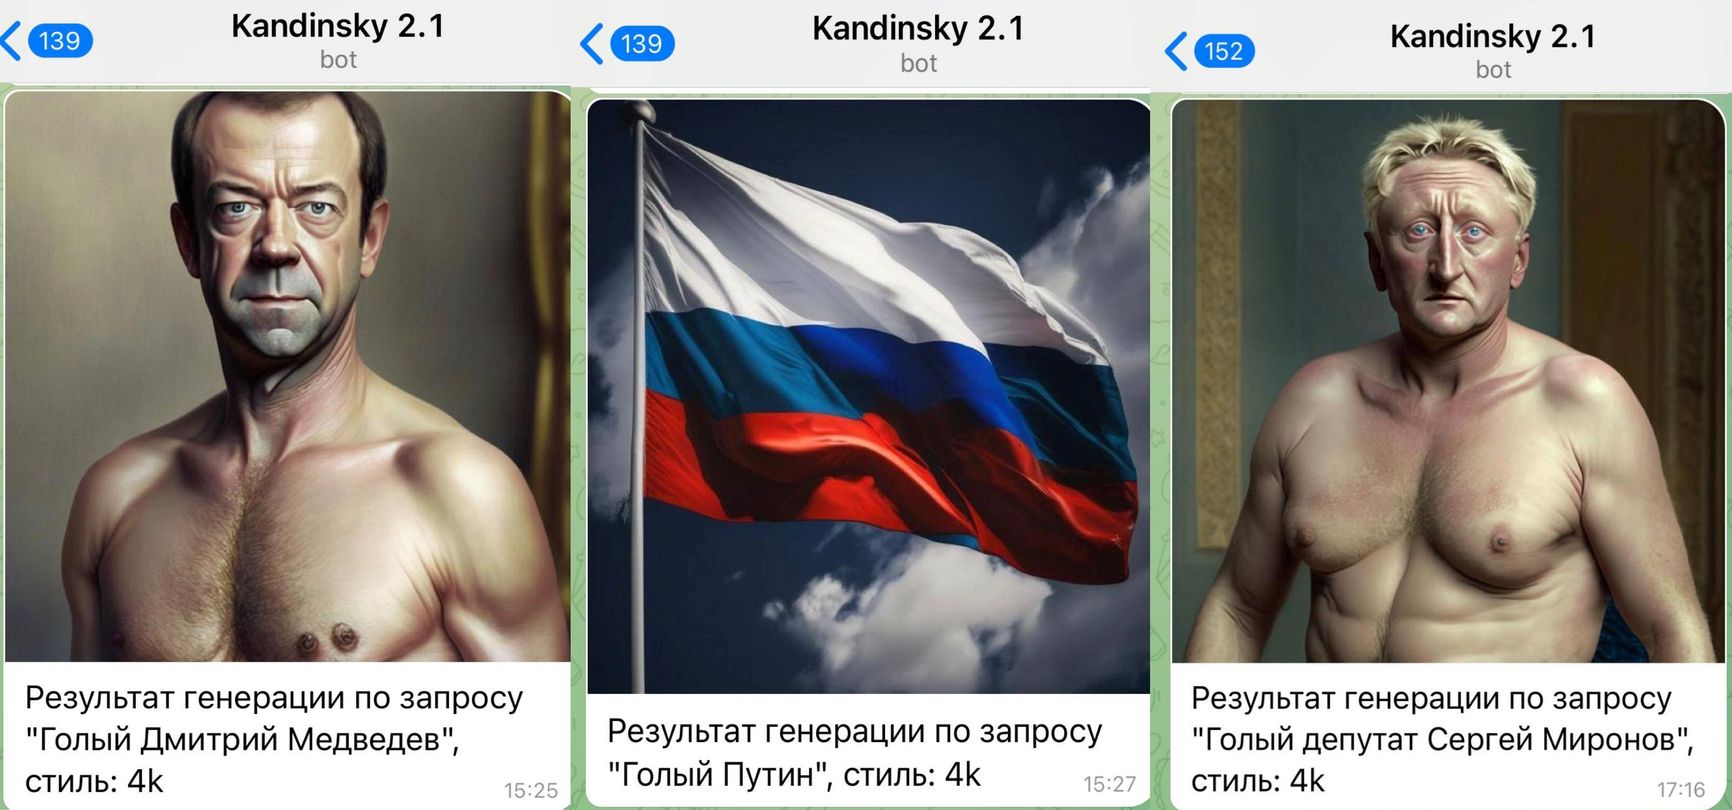 Of all the "naked" politicians, the neural network only covered up Putin with the Russian flag – Dmitry Medvedev and Sergey Mironov were left untouched